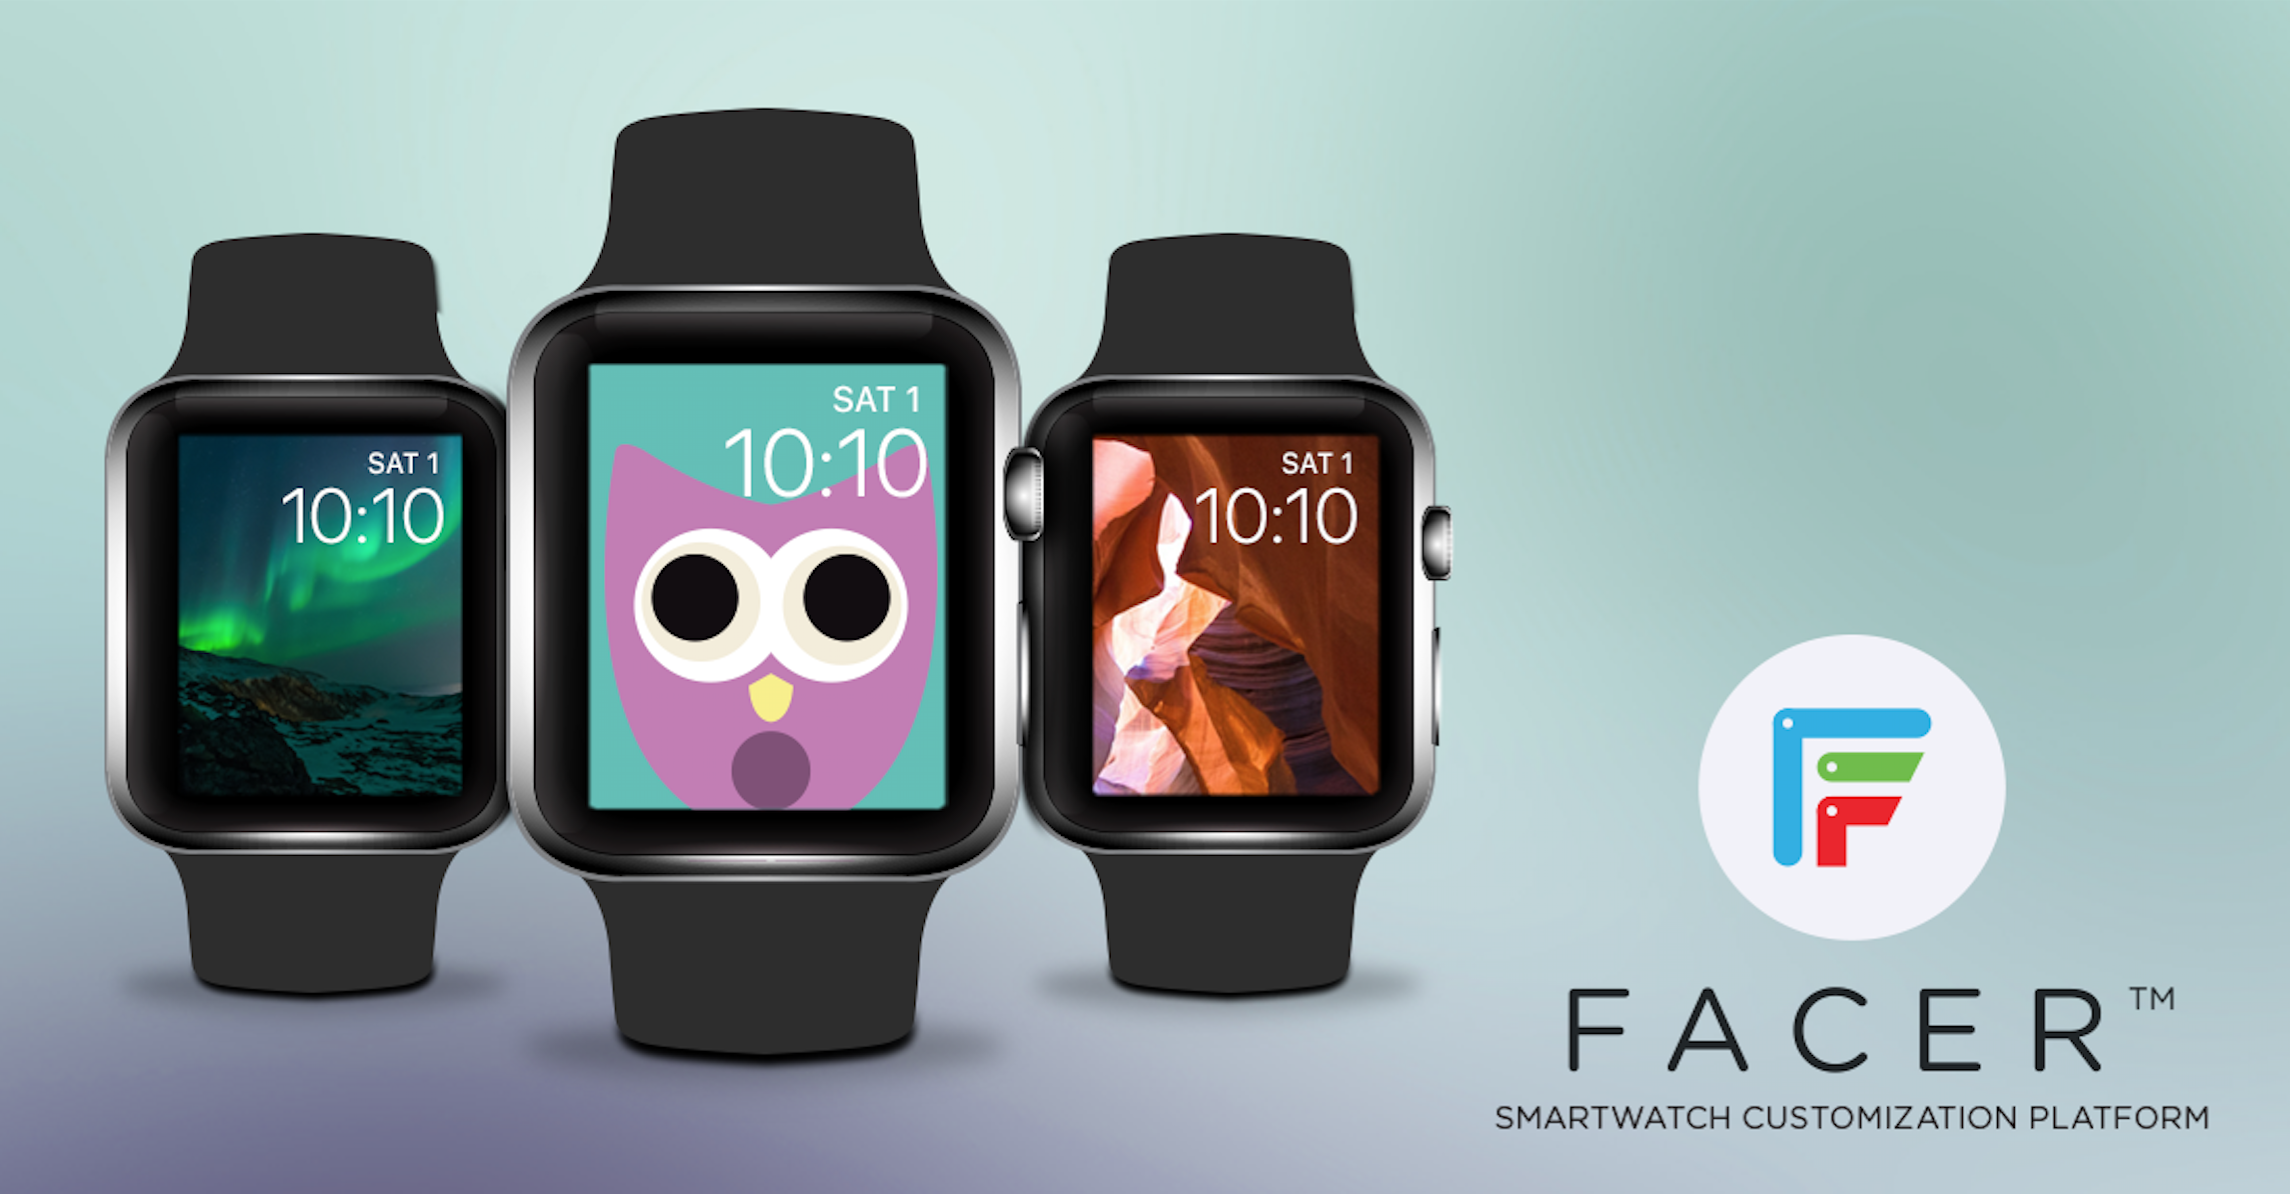 Get Fresh Apple Watch Faces All Day With Facer